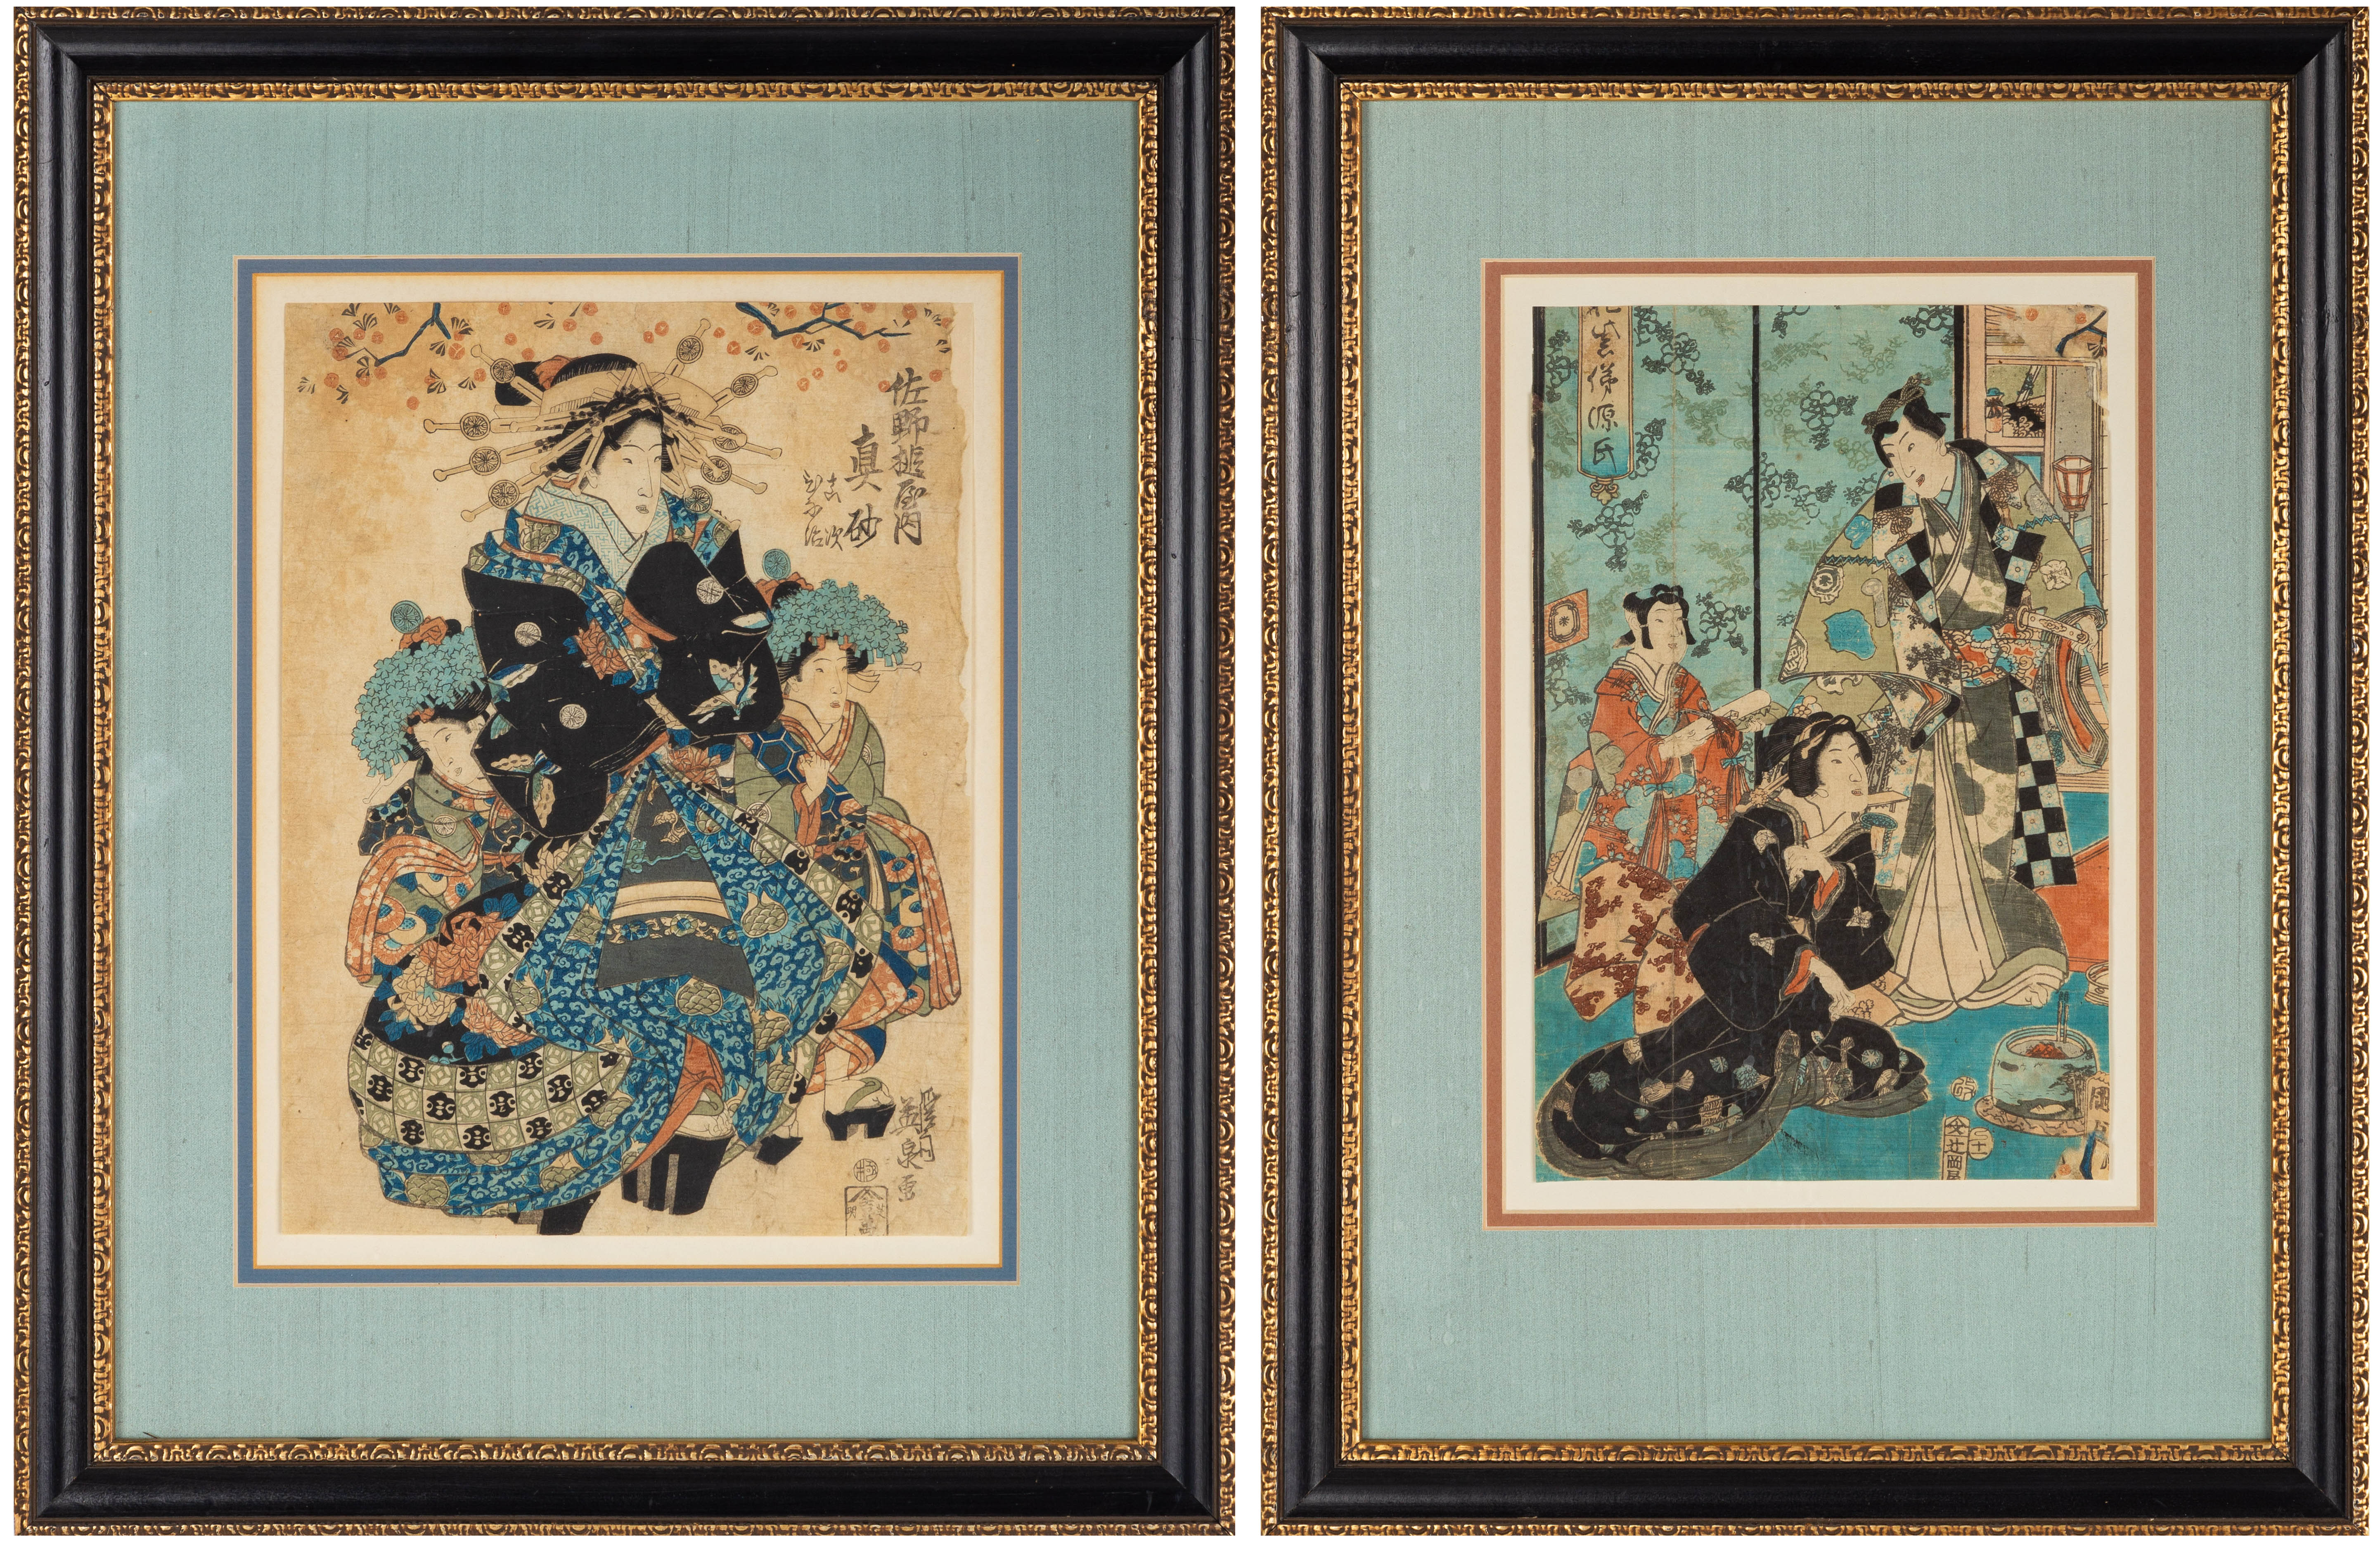  2 JAPANESE WOODBLOCK PRINTS Possibly 3c80ae